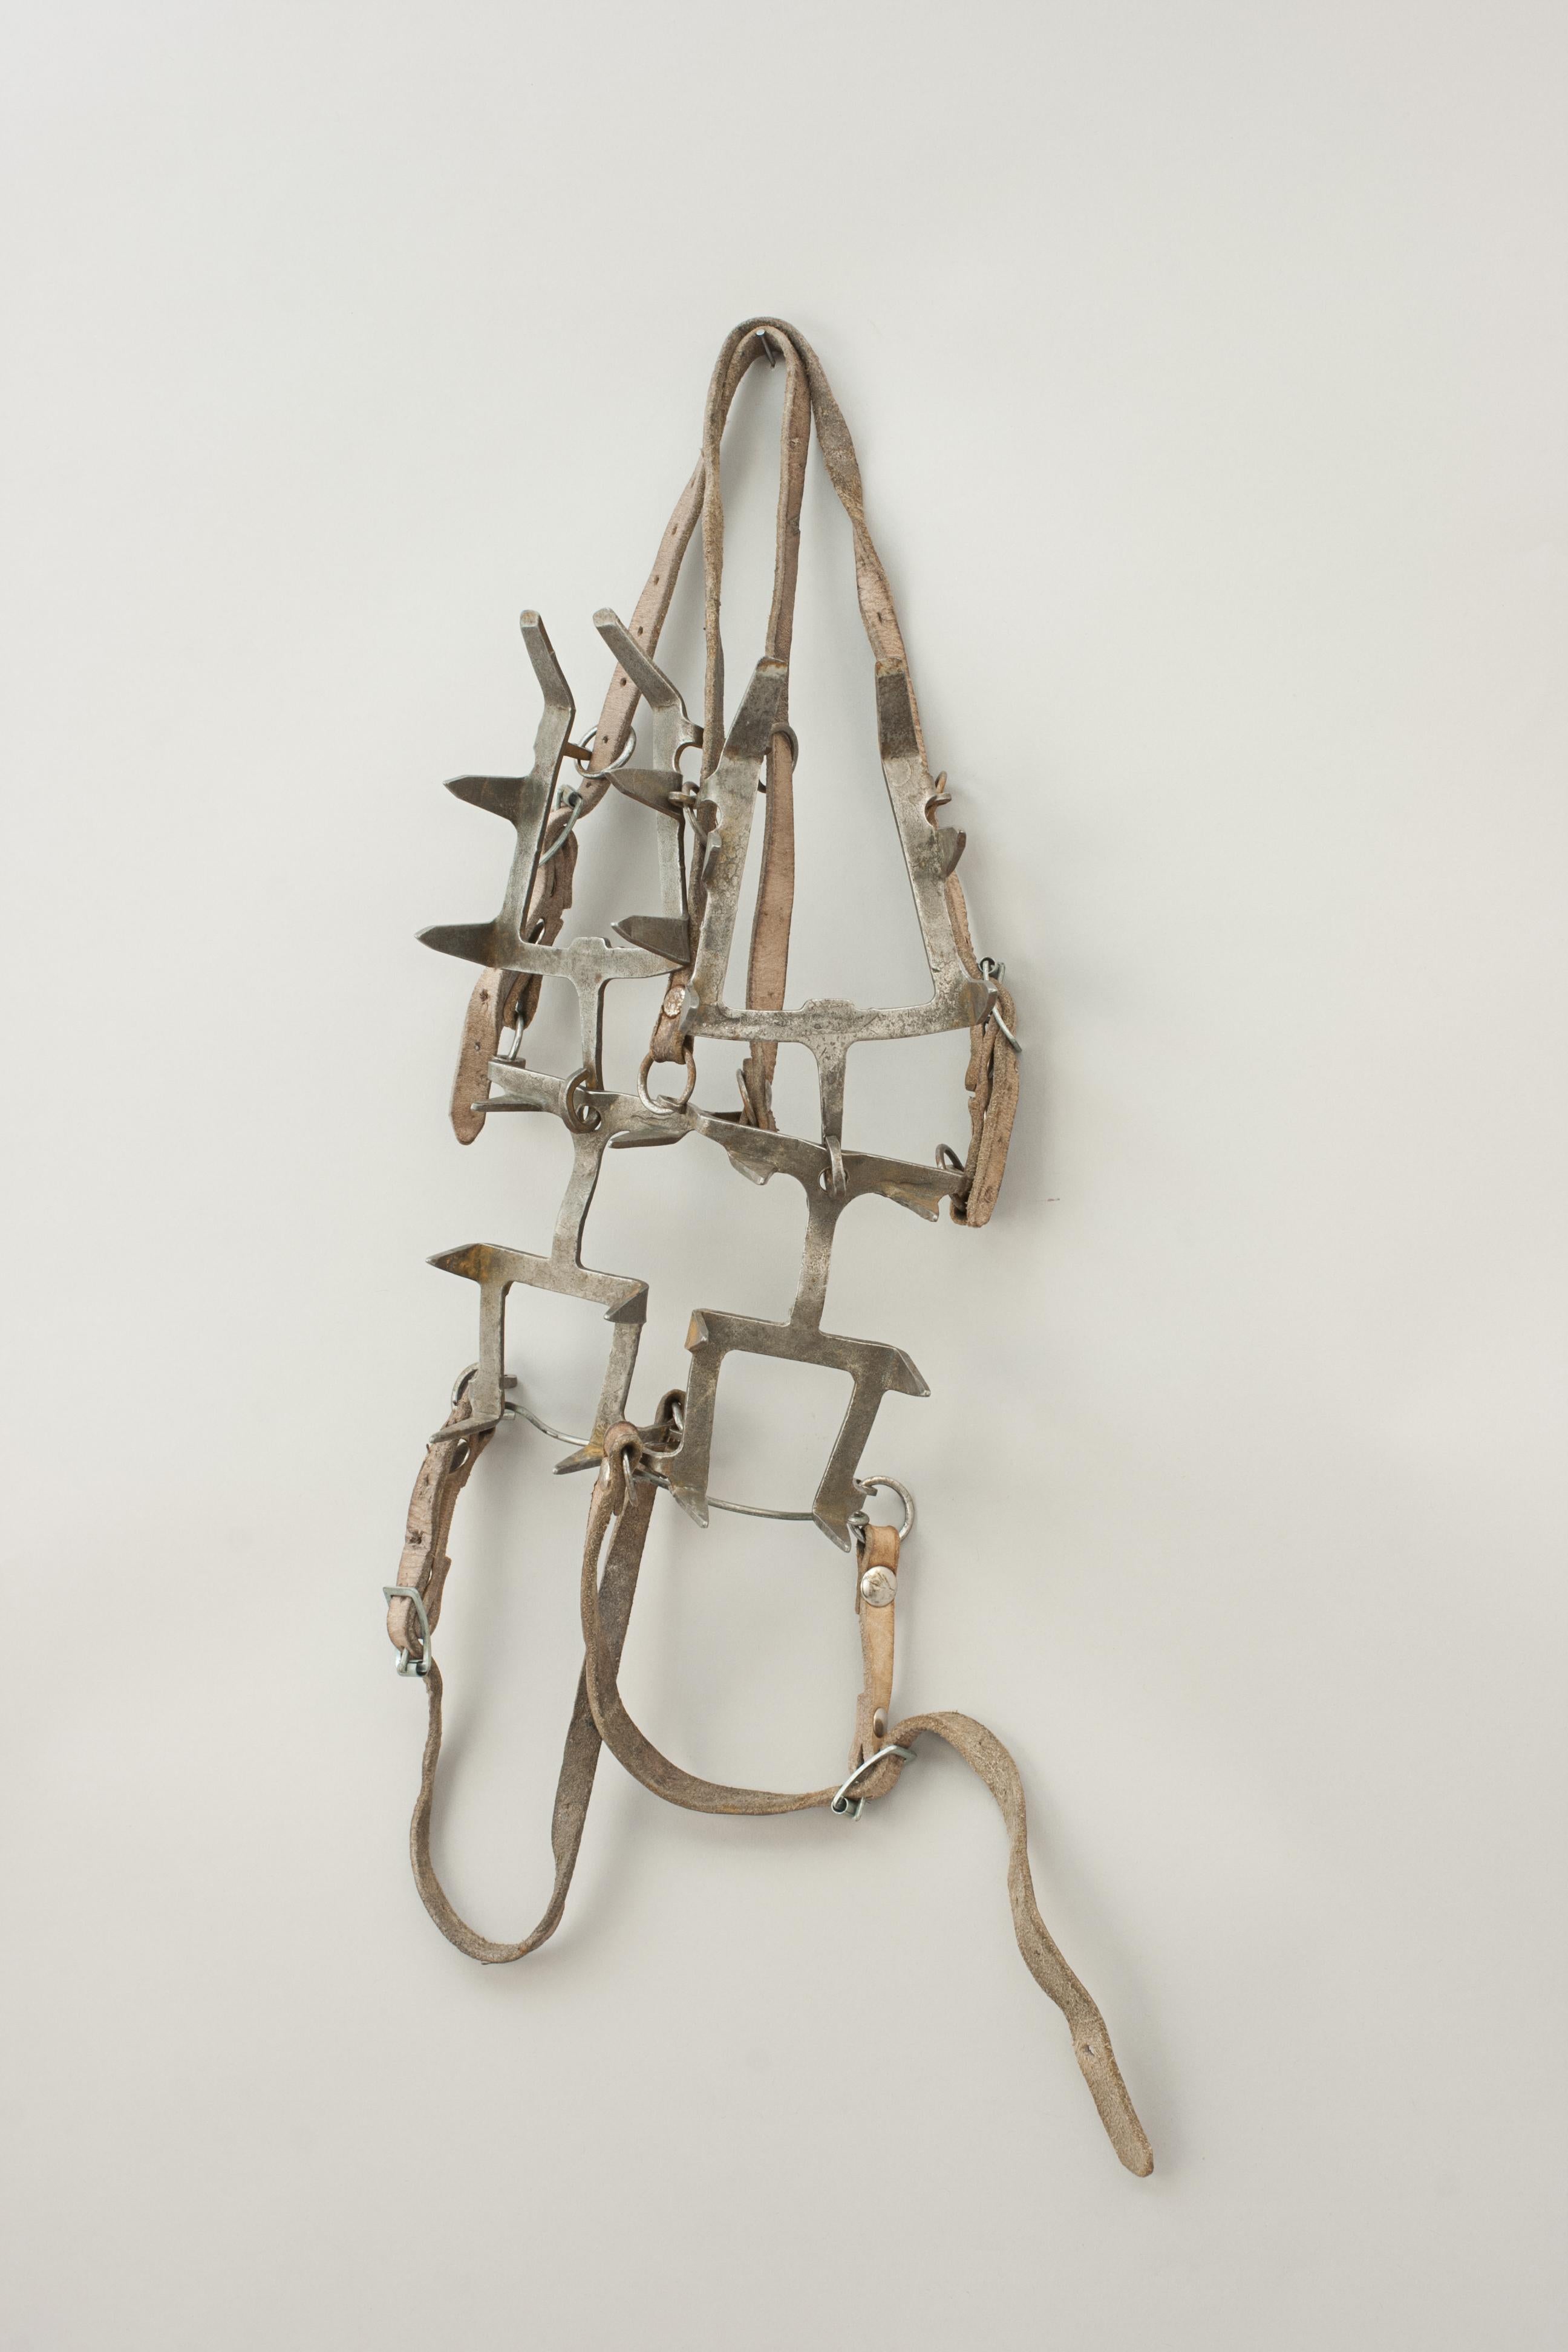 Antique mountain climbing crampons.
A pair of Grivel 12 point iron crampons in the design of Oscar Eckenstein (1859 -1921). Eckenstein was a passionate climber and innovator. He developed this type of hinged crampons in 1908 and two years later,